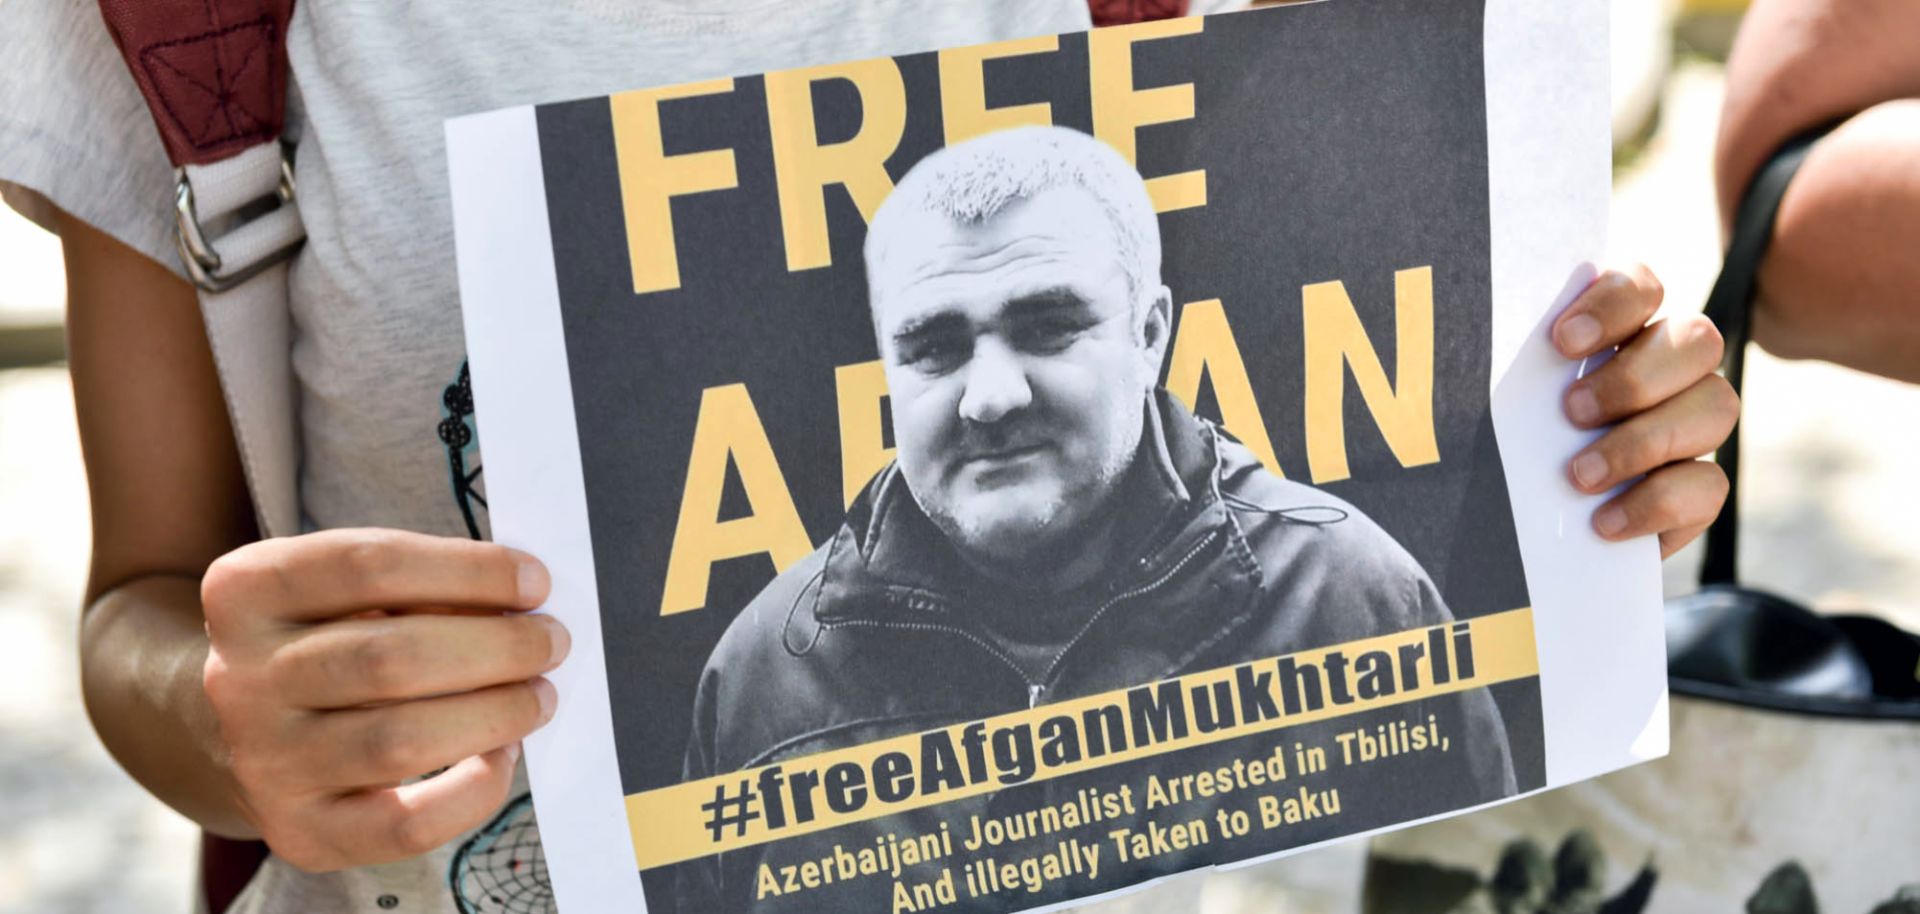 Afgan Mukhtarli, an Azerbaijani activist and journalist living in Georgia, has been detained in Azerbaijan since May under mysterious circumstances. 